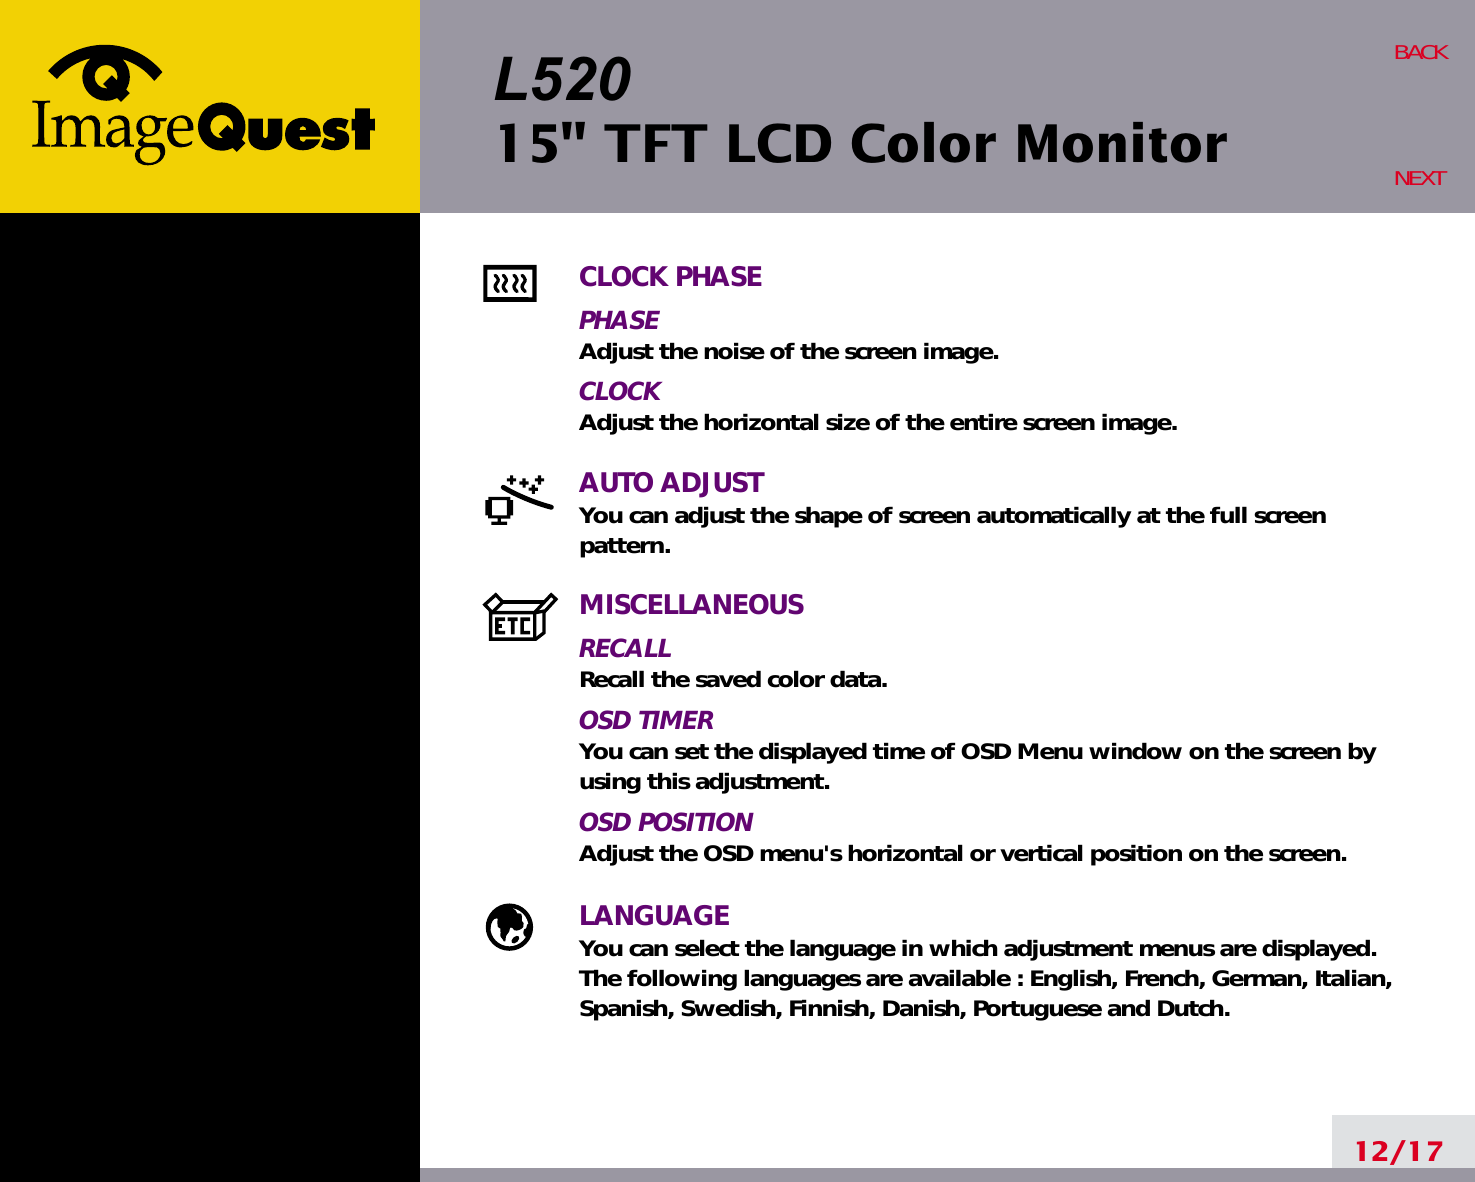 L52015&quot; TFT LCD Color Monitor12/17BACKNEXTCLOCK PHASEPHASEAdjust the noise of the screen image.CLOCKAdjust the horizontal size of the entire screen image.AUTO ADJUSTYou can adjust the shape of screen automatically at the full screenpattern.MISCELLANEOUSRECALLRecall the saved color data.OSD TIMERYou can set the displayed time of OSD Menu window on the screen byusing this adjustment.OSD POSITIONAdjust the OSD menu&apos;s horizontal or vertical position on the screen.LANGUAGEYou can select the language in which adjustment menus are displayed. The following languages are available : English, French, German, Italian,Spanish, Swedish, Finnish, Danish, Portuguese and Dutch.